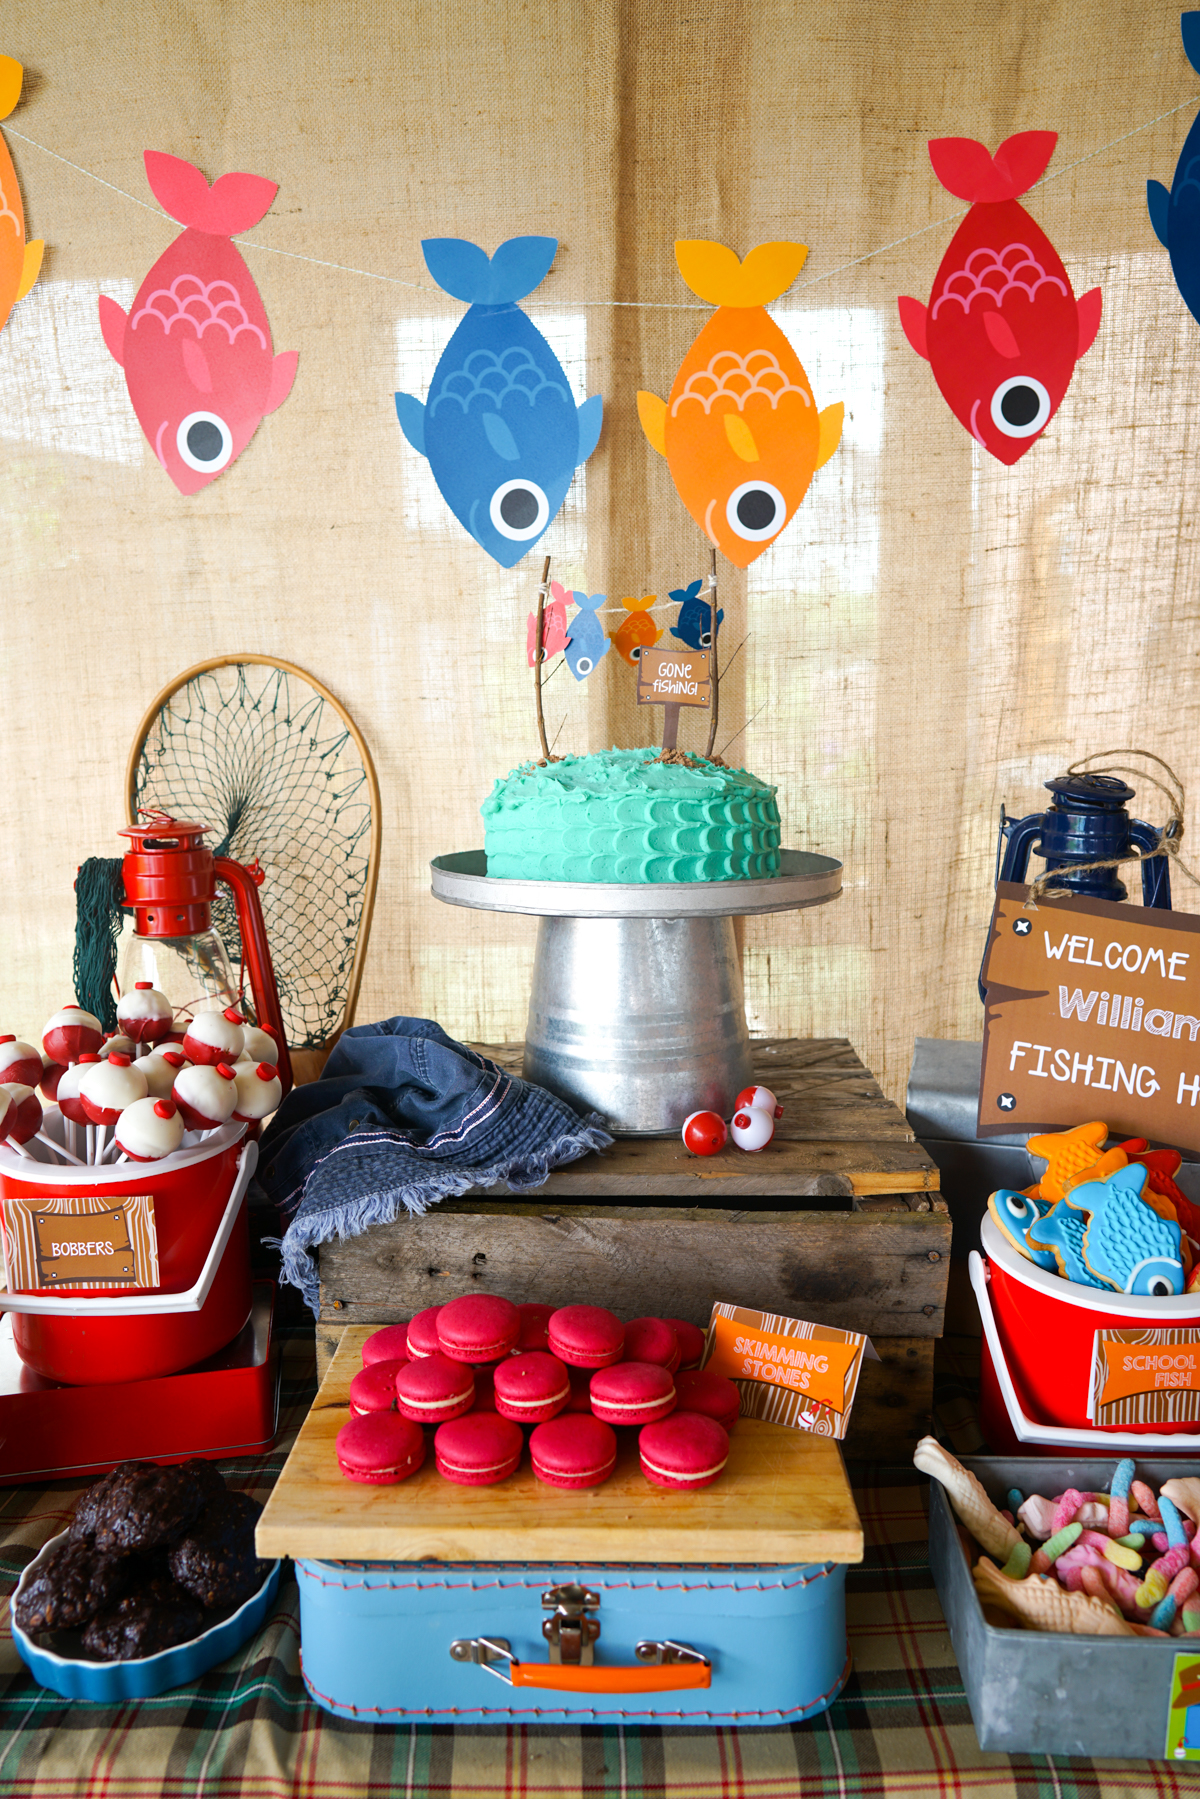 Fishing Theme Birthday Party Decorations 1st Gone Fishing 1st Birthday Decorations with The Big One Fishing Birthday Backdrop Fishing Banner Cake